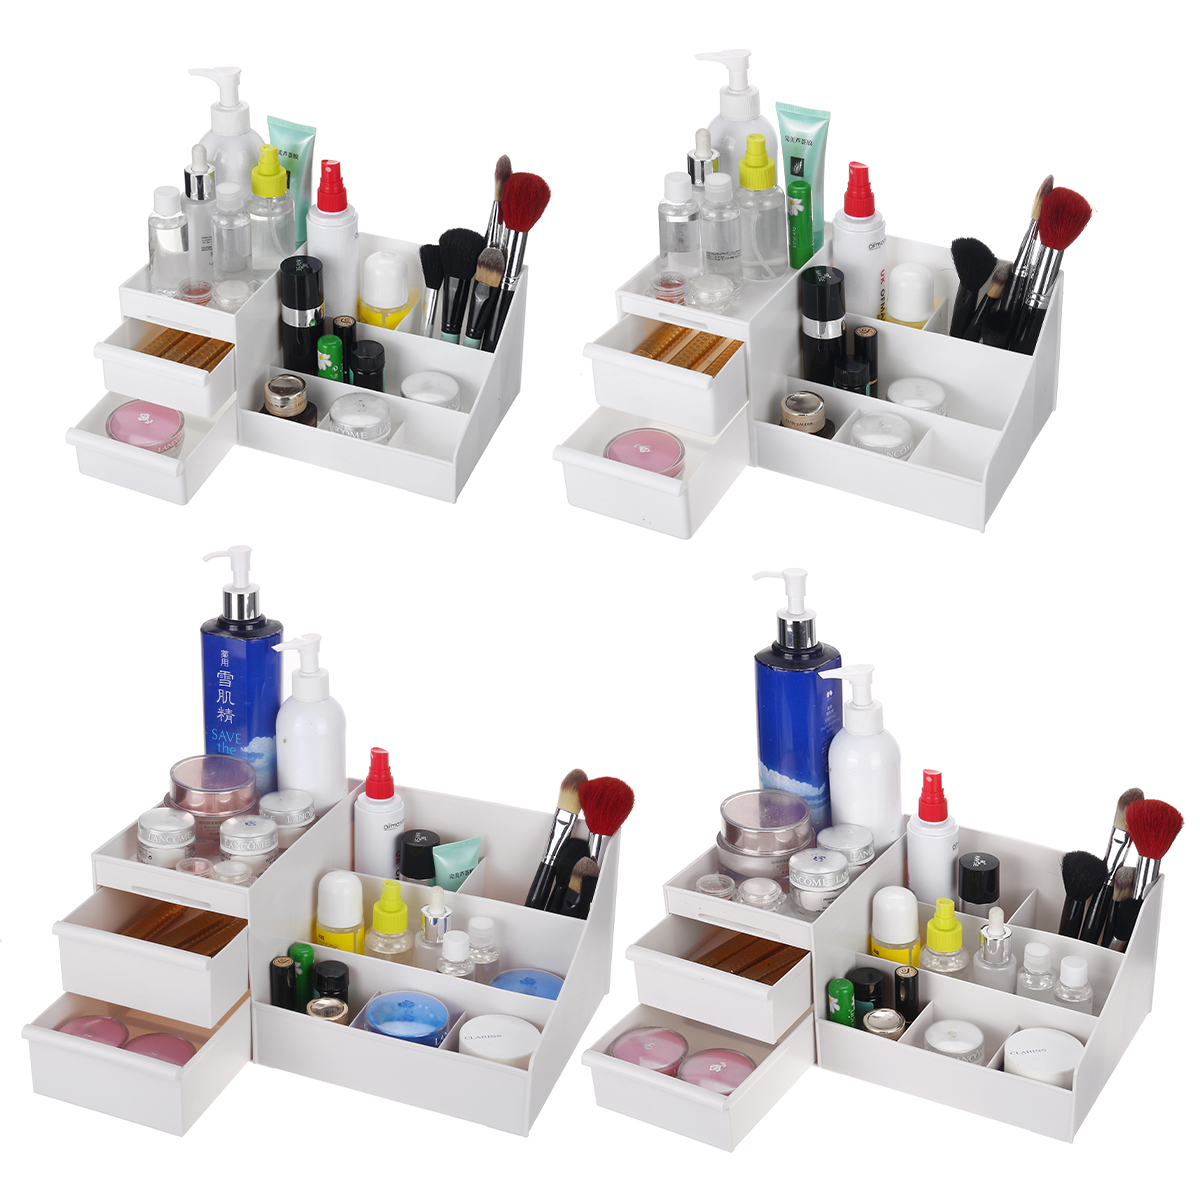 Plastic-Cosmetic-Makeup-Storage-Box-Organizer-Case-Holder-Jewelry-with-Drawer-1700918-3